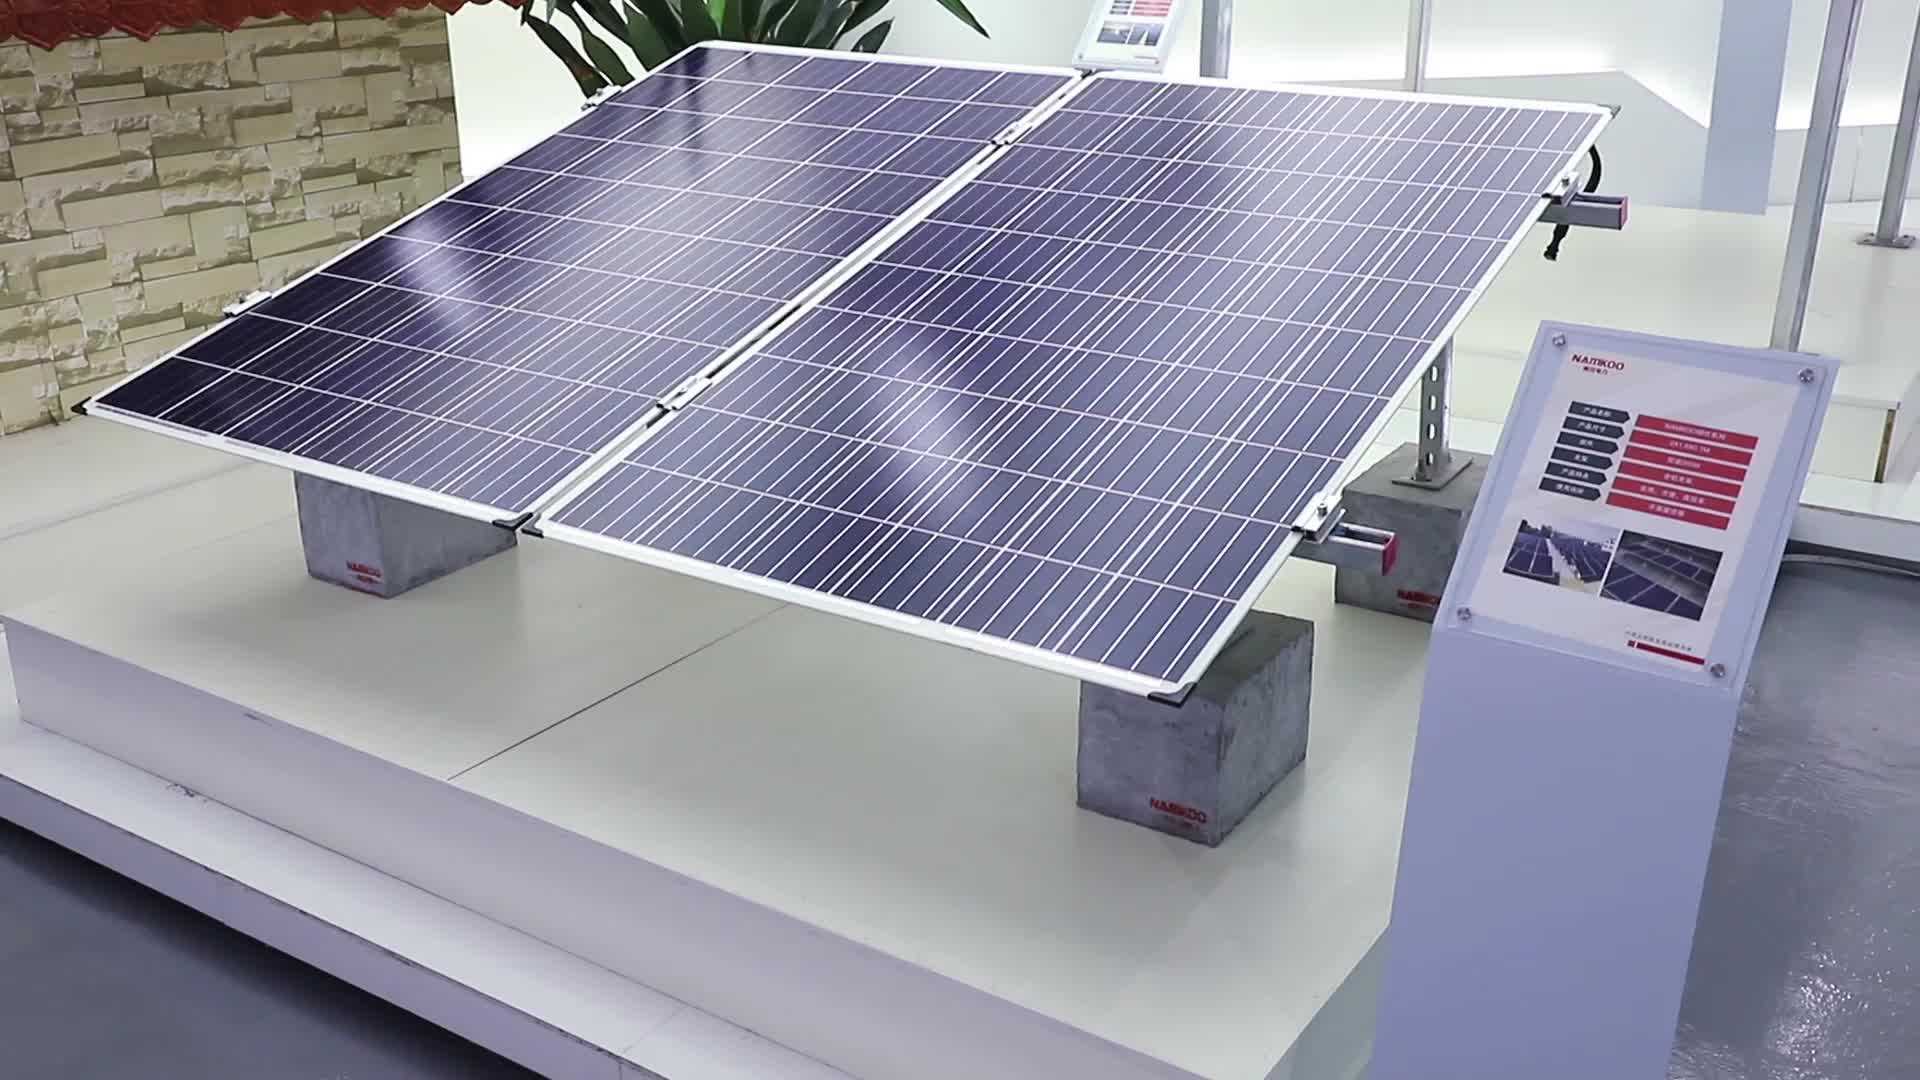 One stop service solar power system home solar energy systems with stock